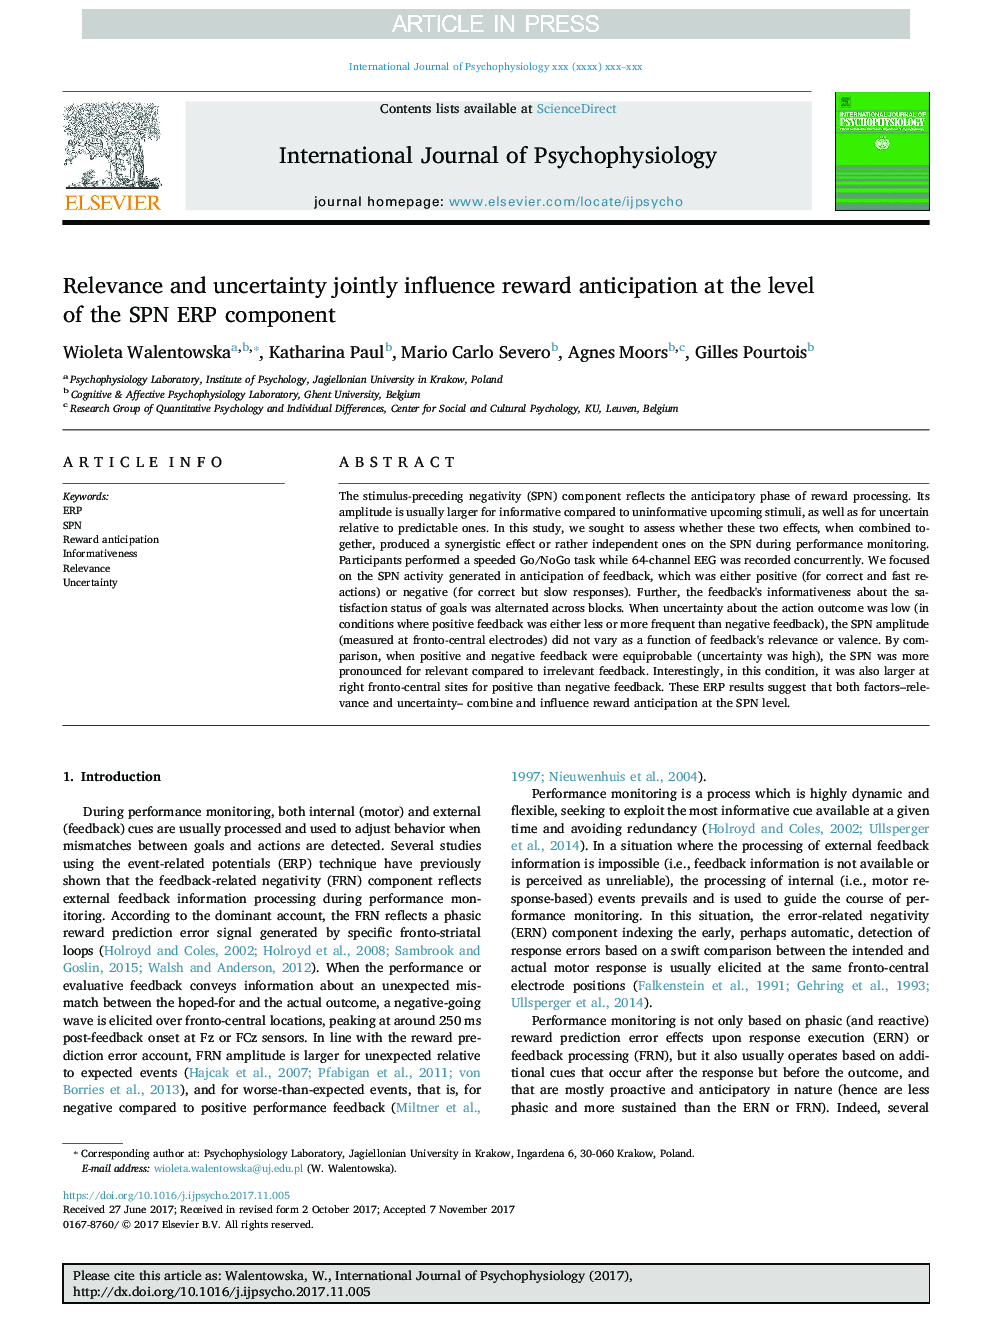 Relevance and uncertainty jointly influence reward anticipation at the level of the SPN ERP component